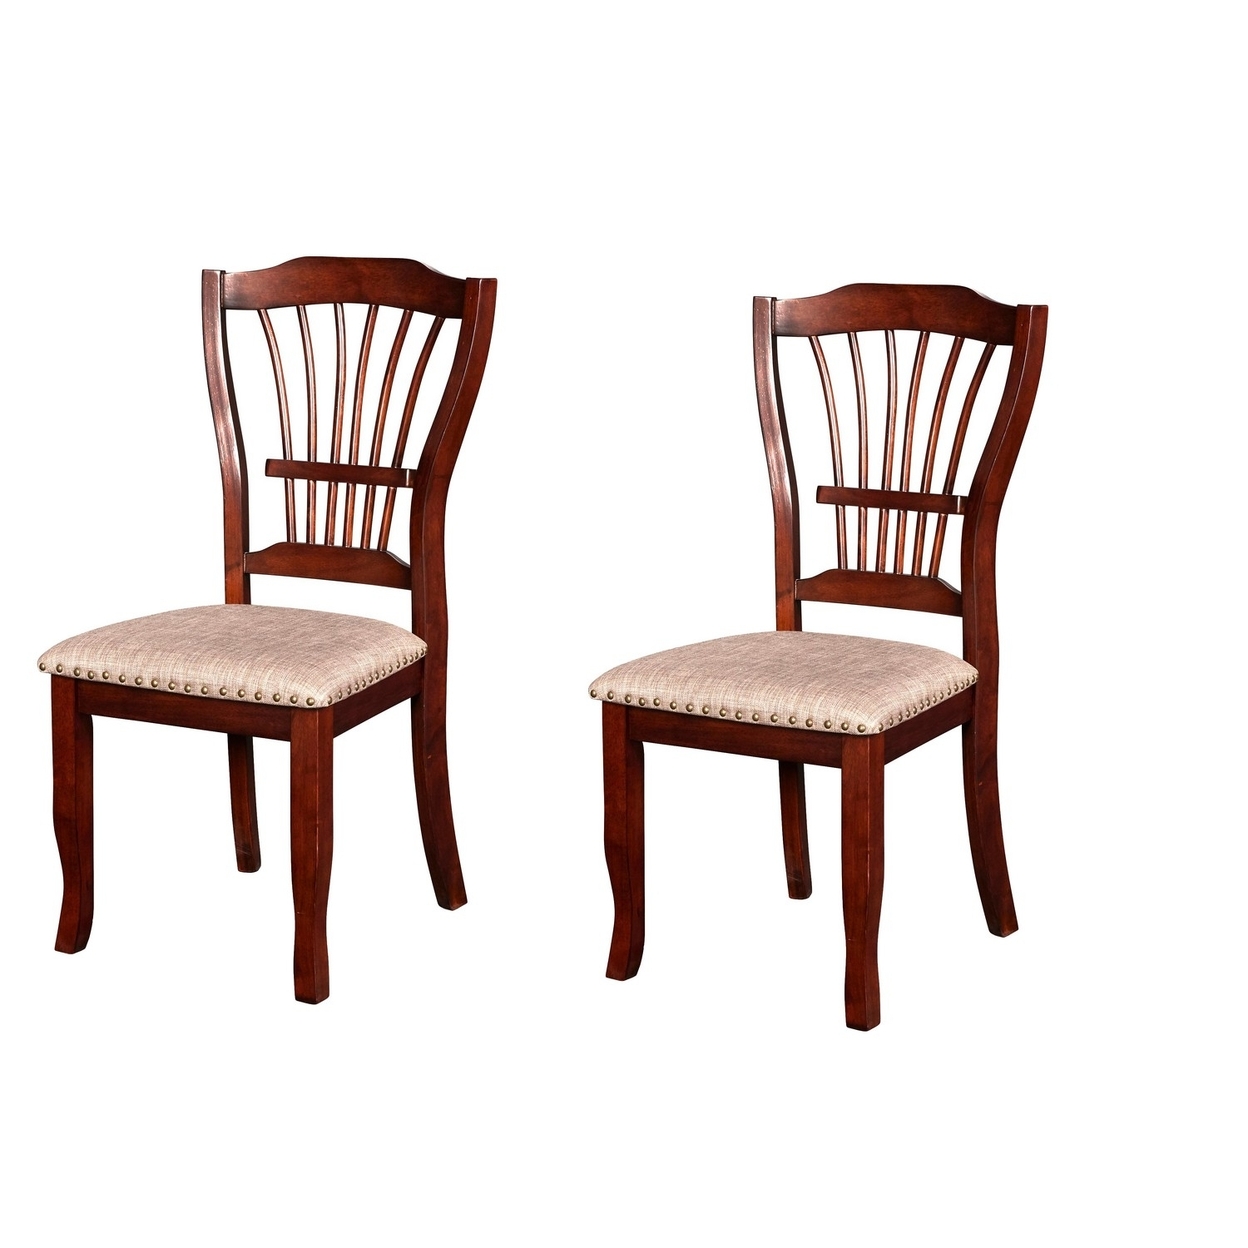 Slatted Back Wooden Dining Chair With Nailhead Trim, Set Of 2, Brown- Saltoro Sherpi